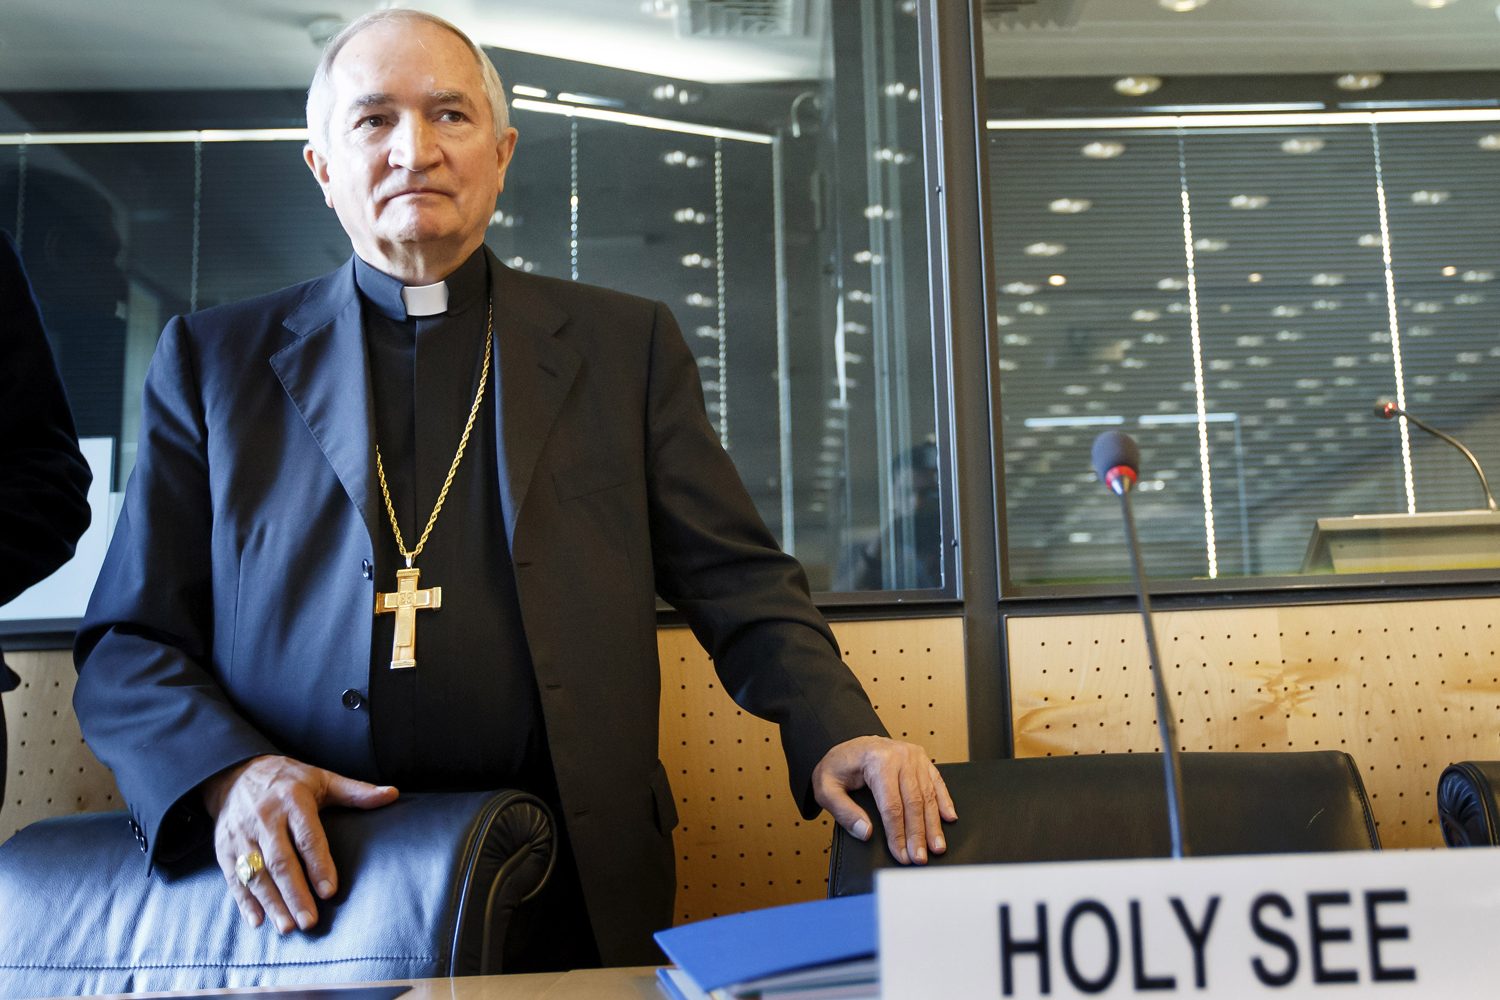 Archbishop Silvano Tomasi arrives prior to the U.N. torture committee hearing on the Vatican, at the headquarters of the office of the High Commissioner for Human Rights in Geneva on May 5, 2014. (Salvatore Di Nolfi — AP)